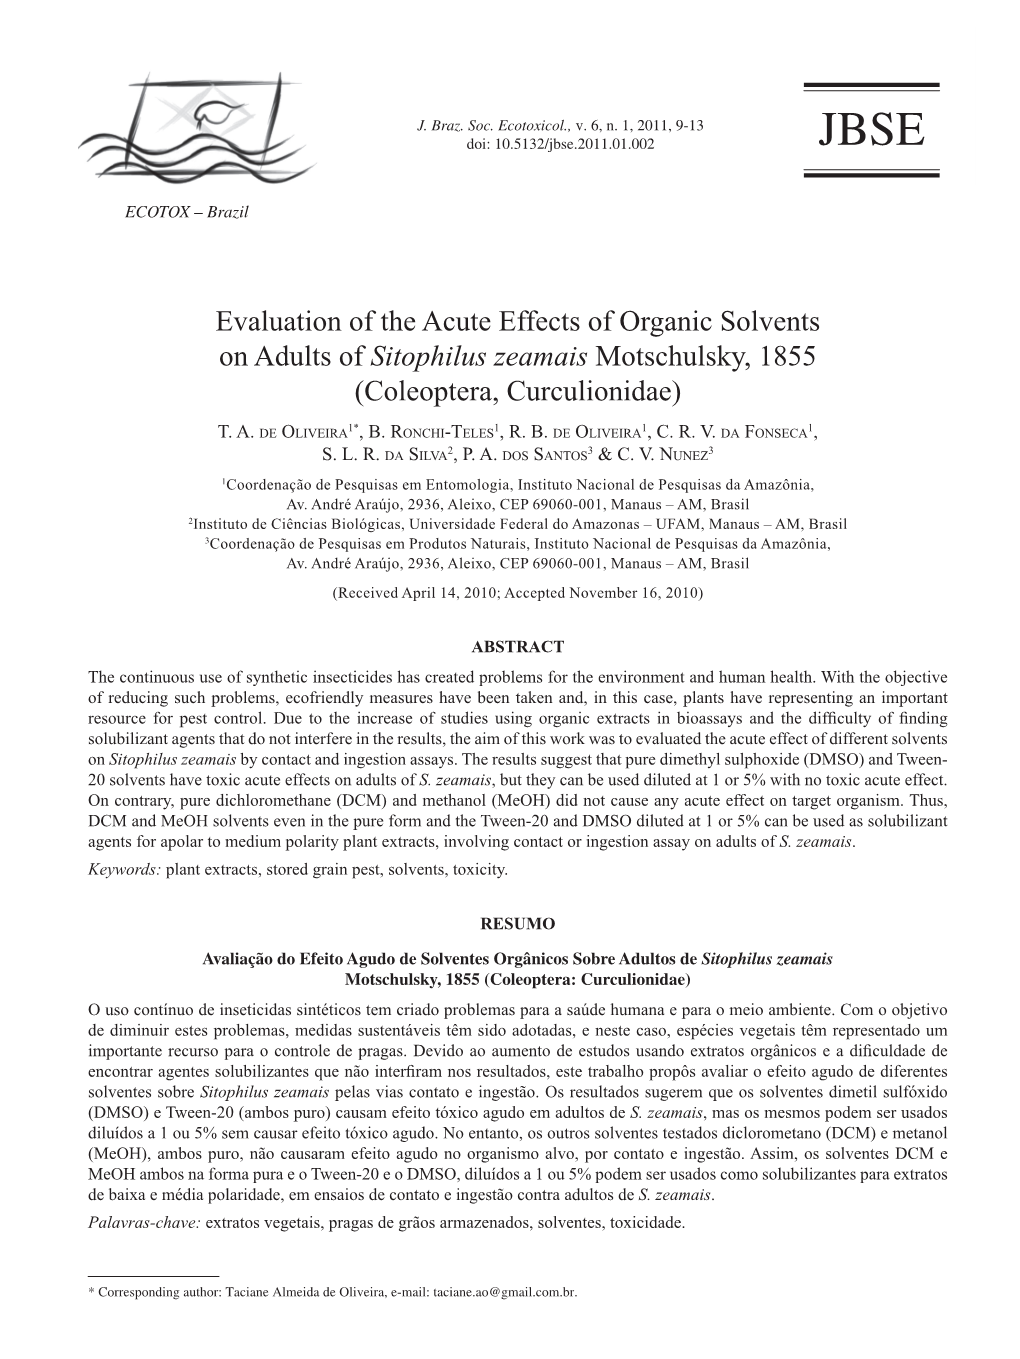 Evaluation of the Acute Effects of Organic Solvents on Adults of Sitophilus Zeamais Motschulsky, 1855 (Coleoptera, Curculionidae)